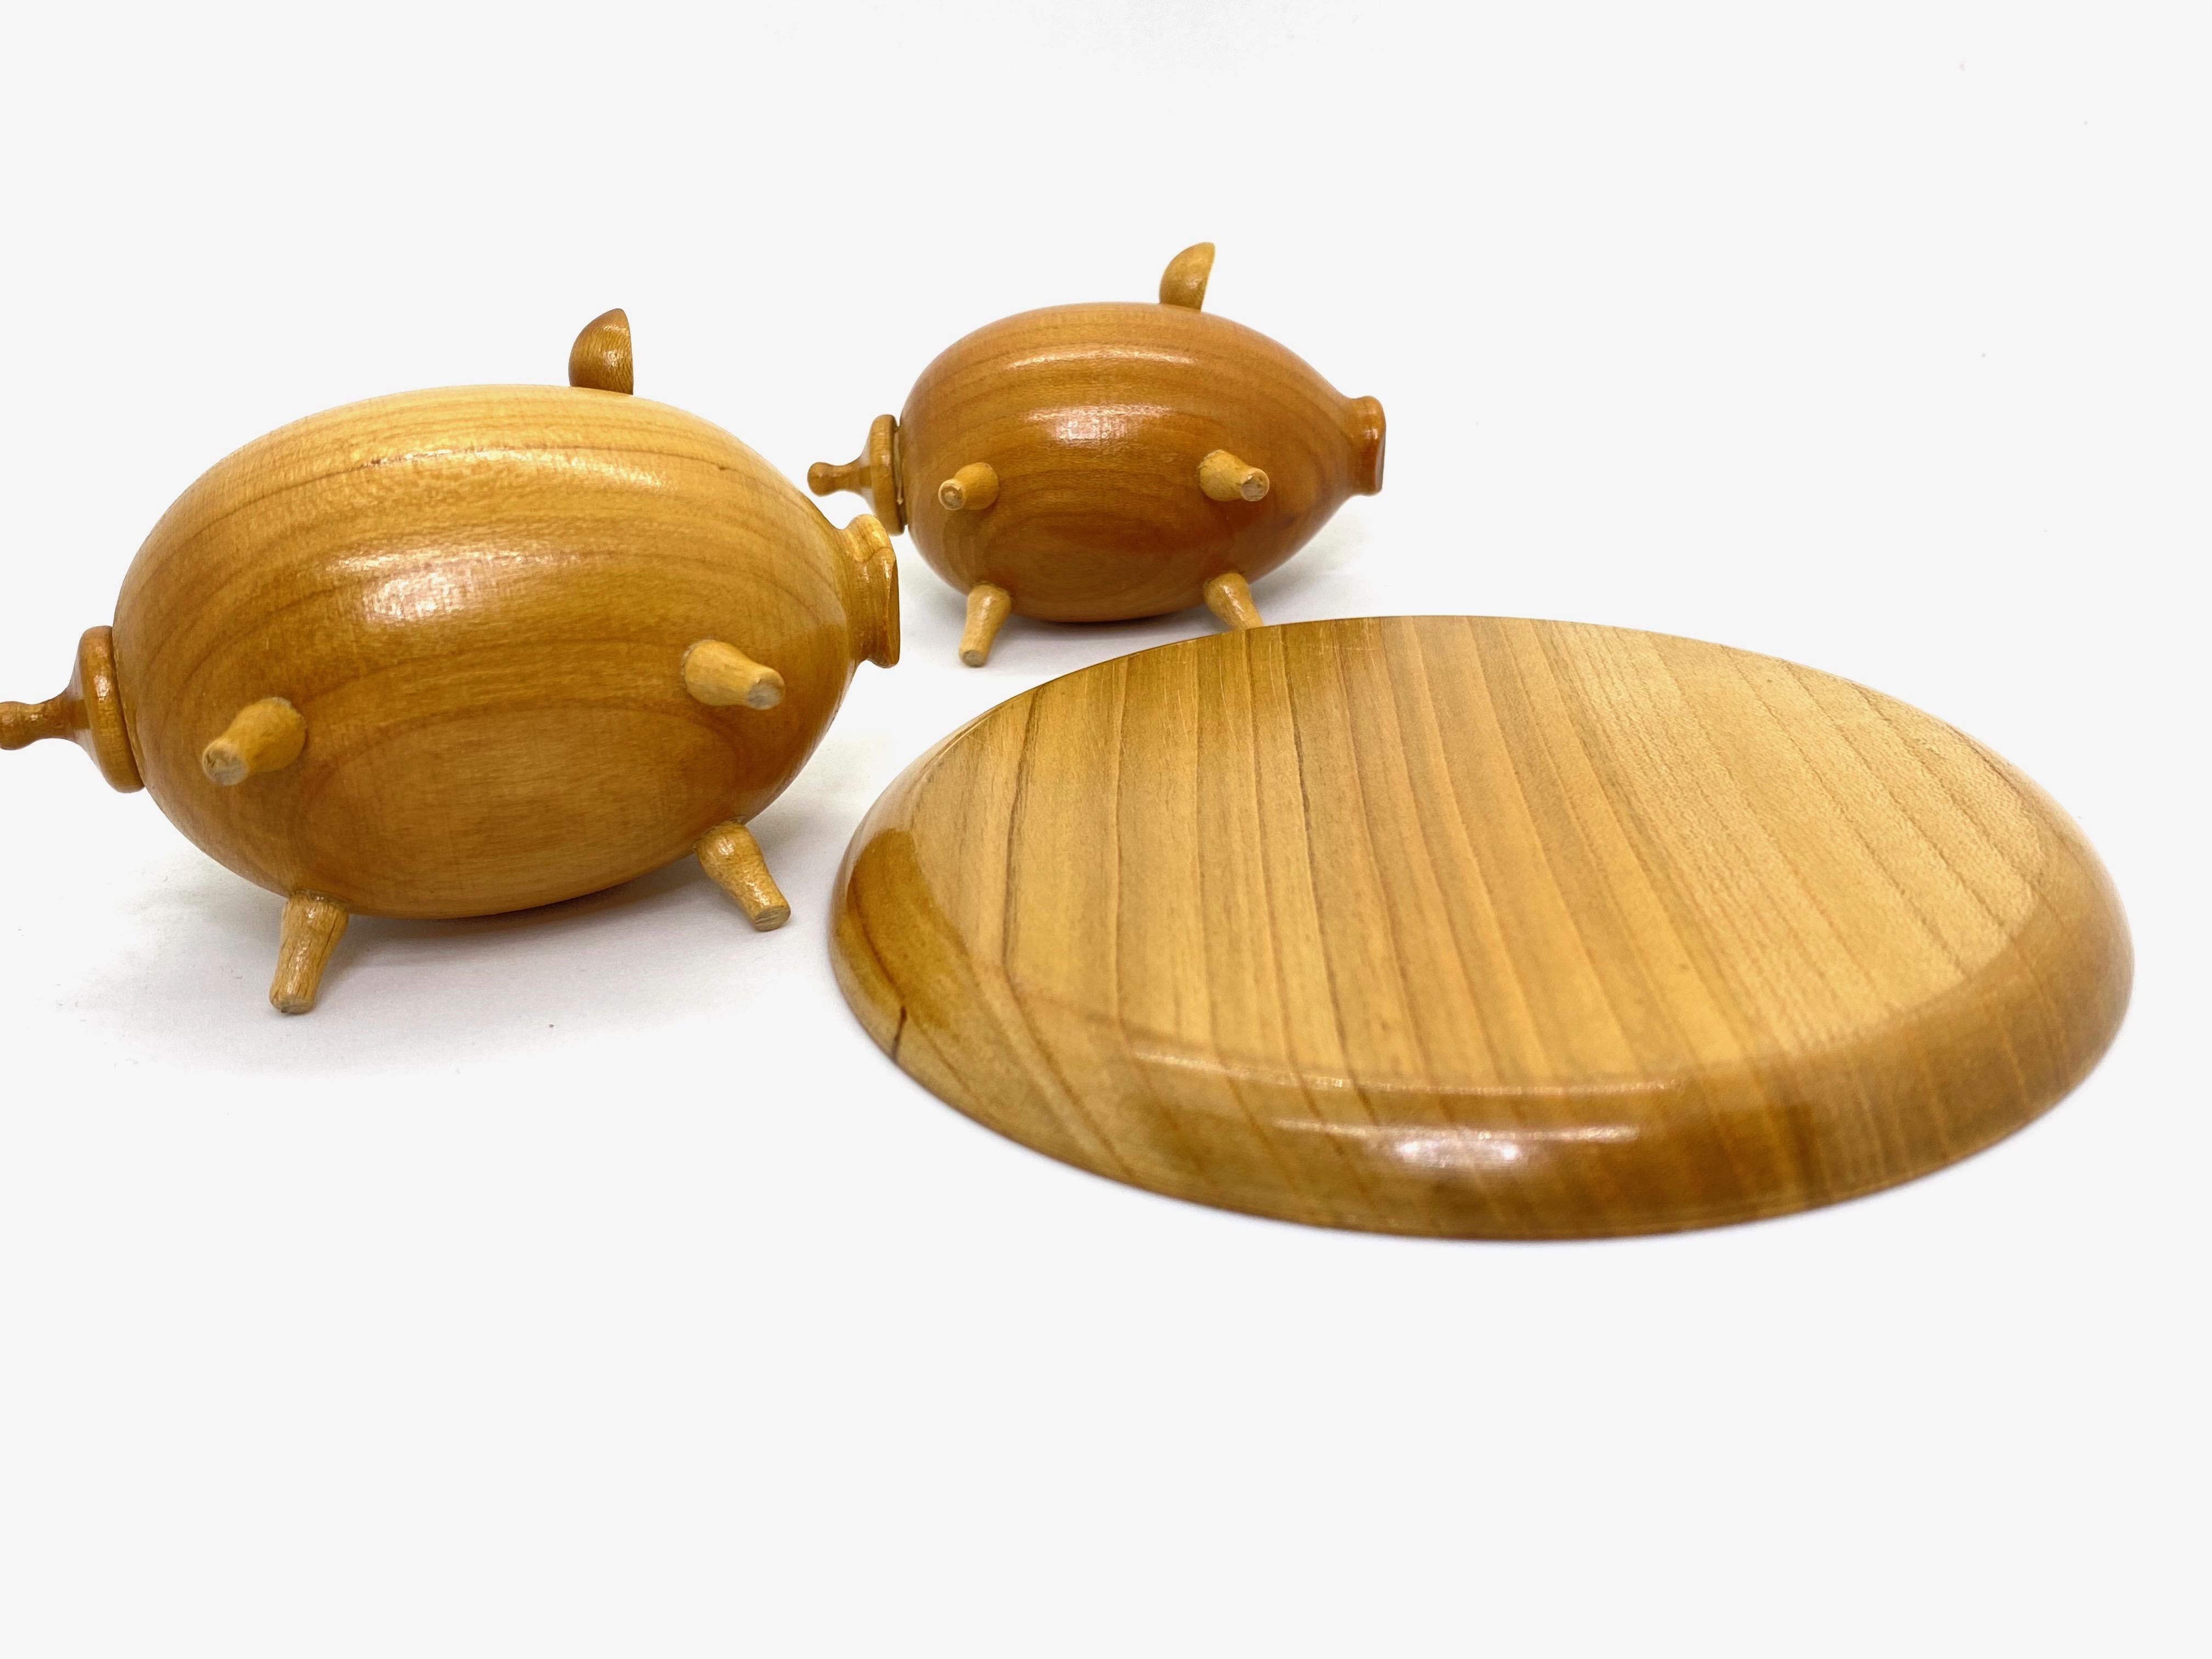 Two Salt and Paper Shaker Pigs on Tray, Wood Danish Design, 1960s In Good Condition For Sale In Nuernberg, DE